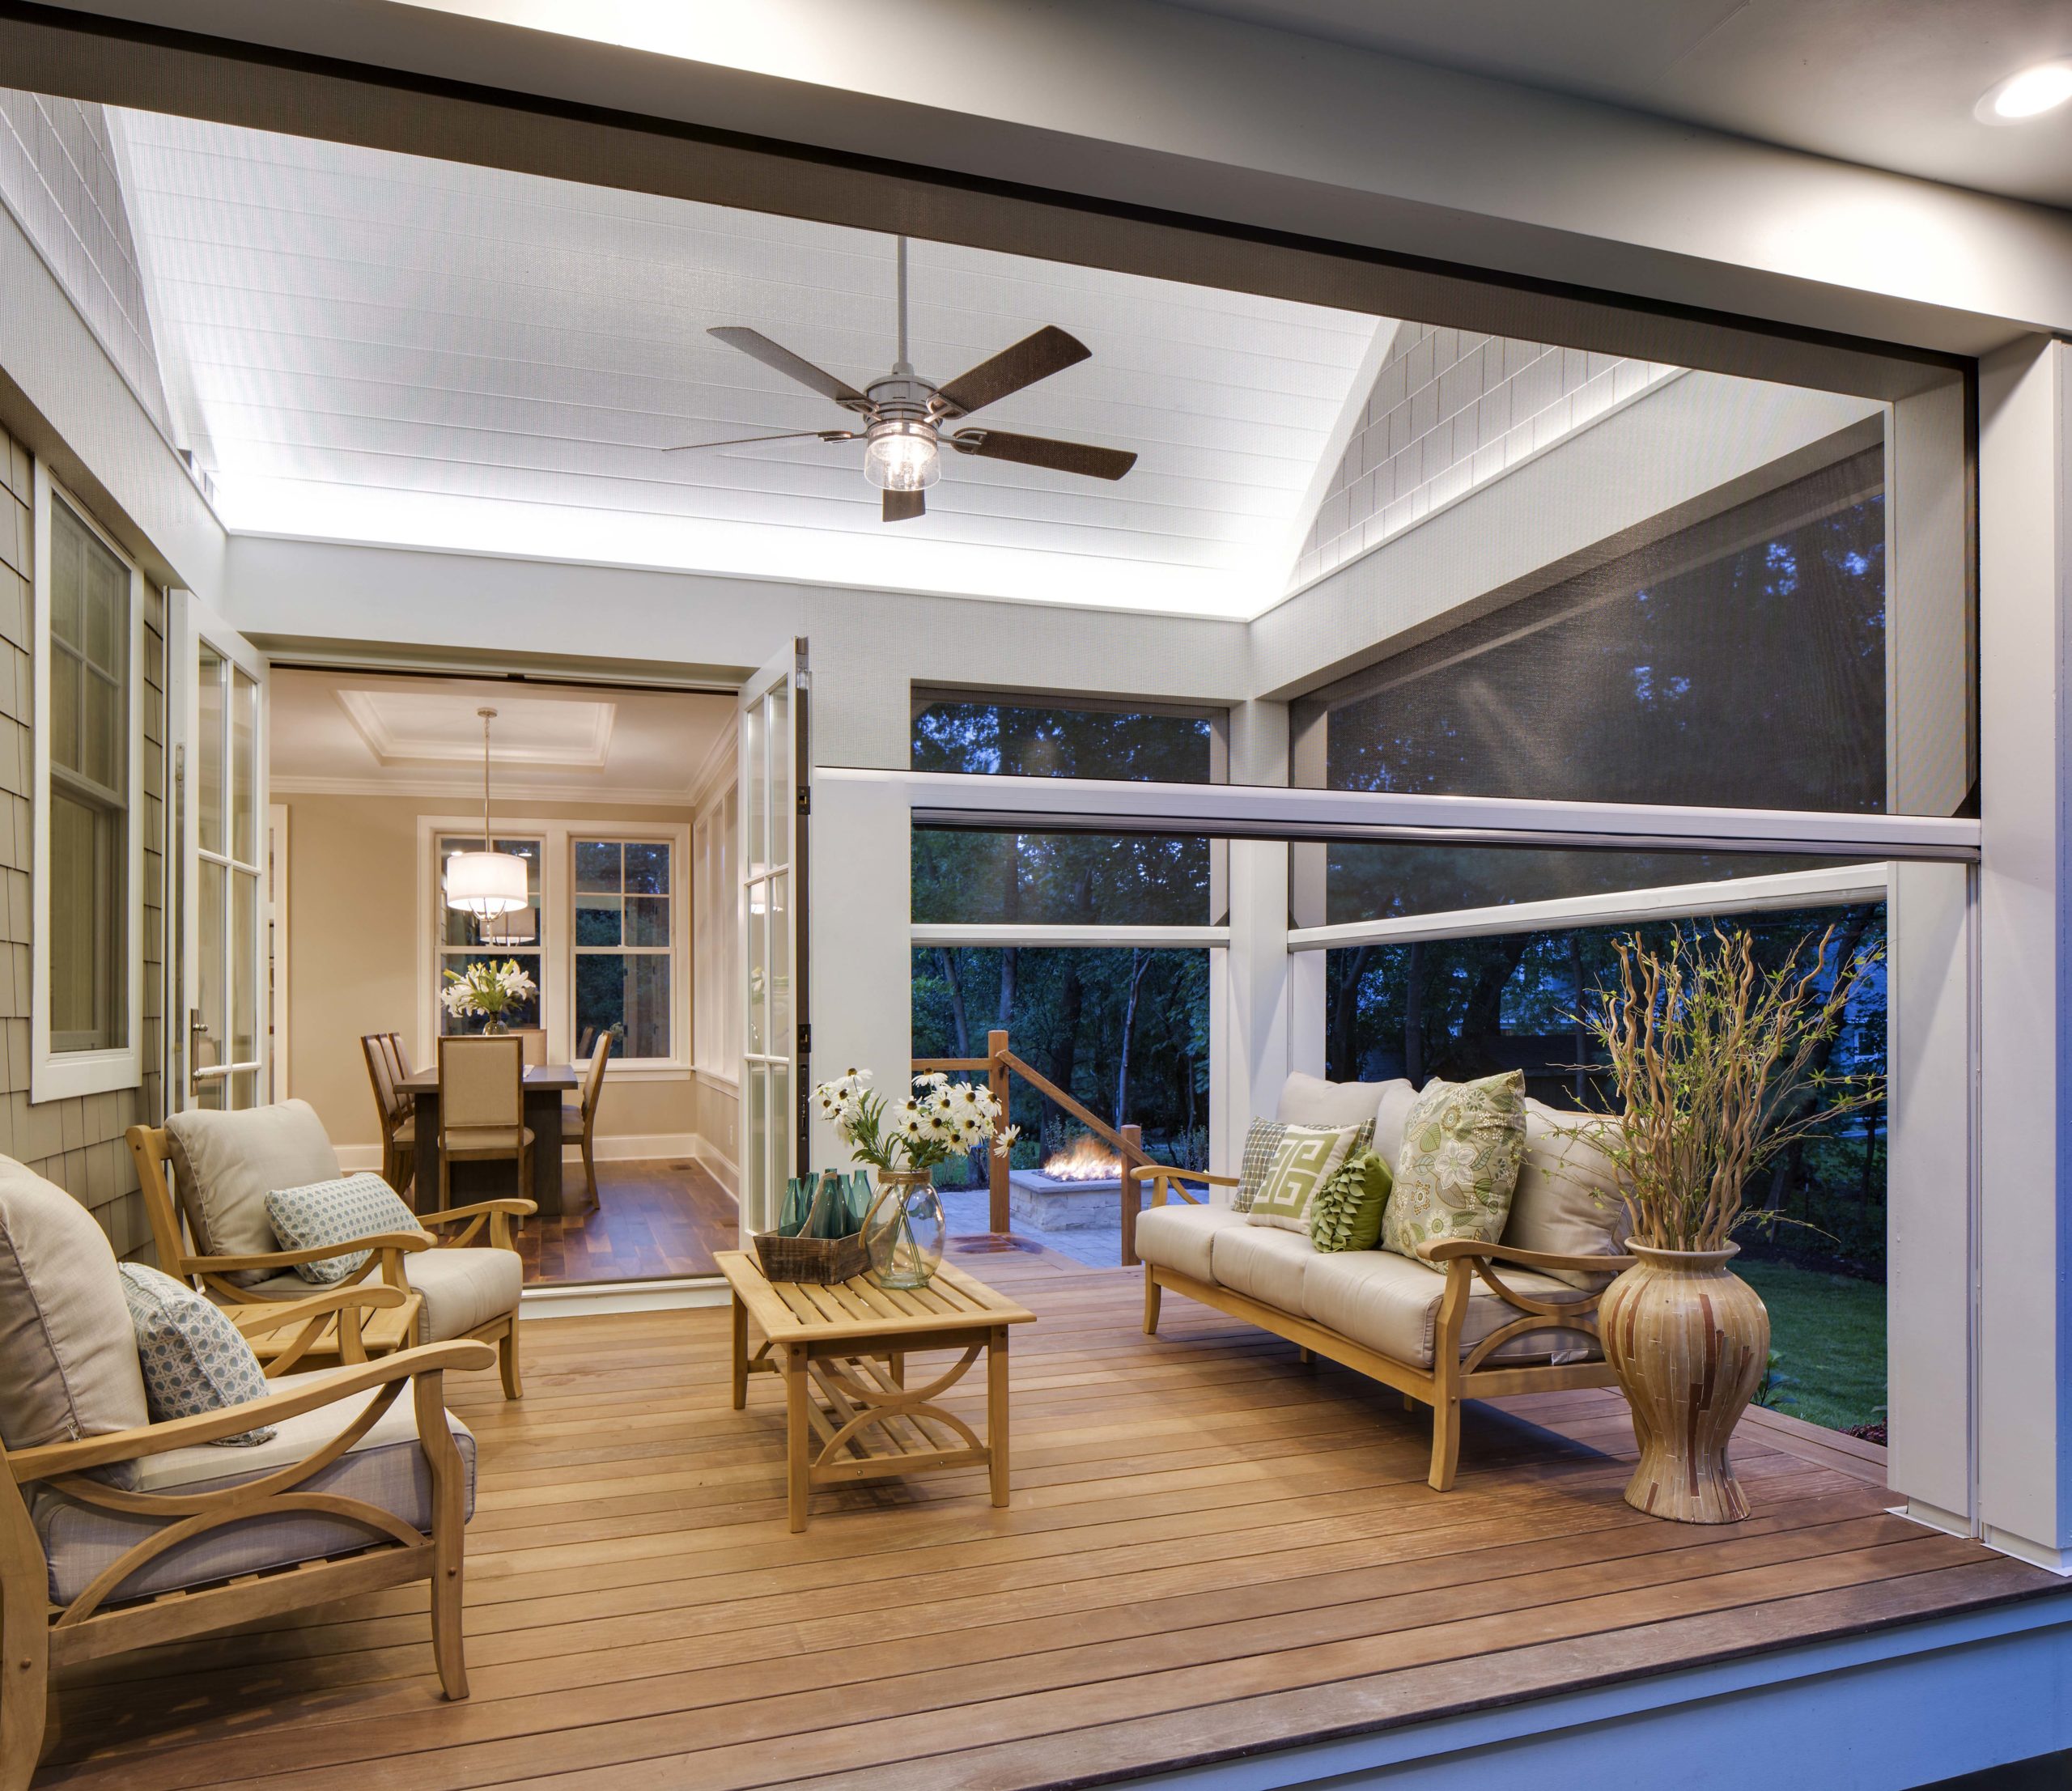 A screened in porch with furniture and a ceiling fan.